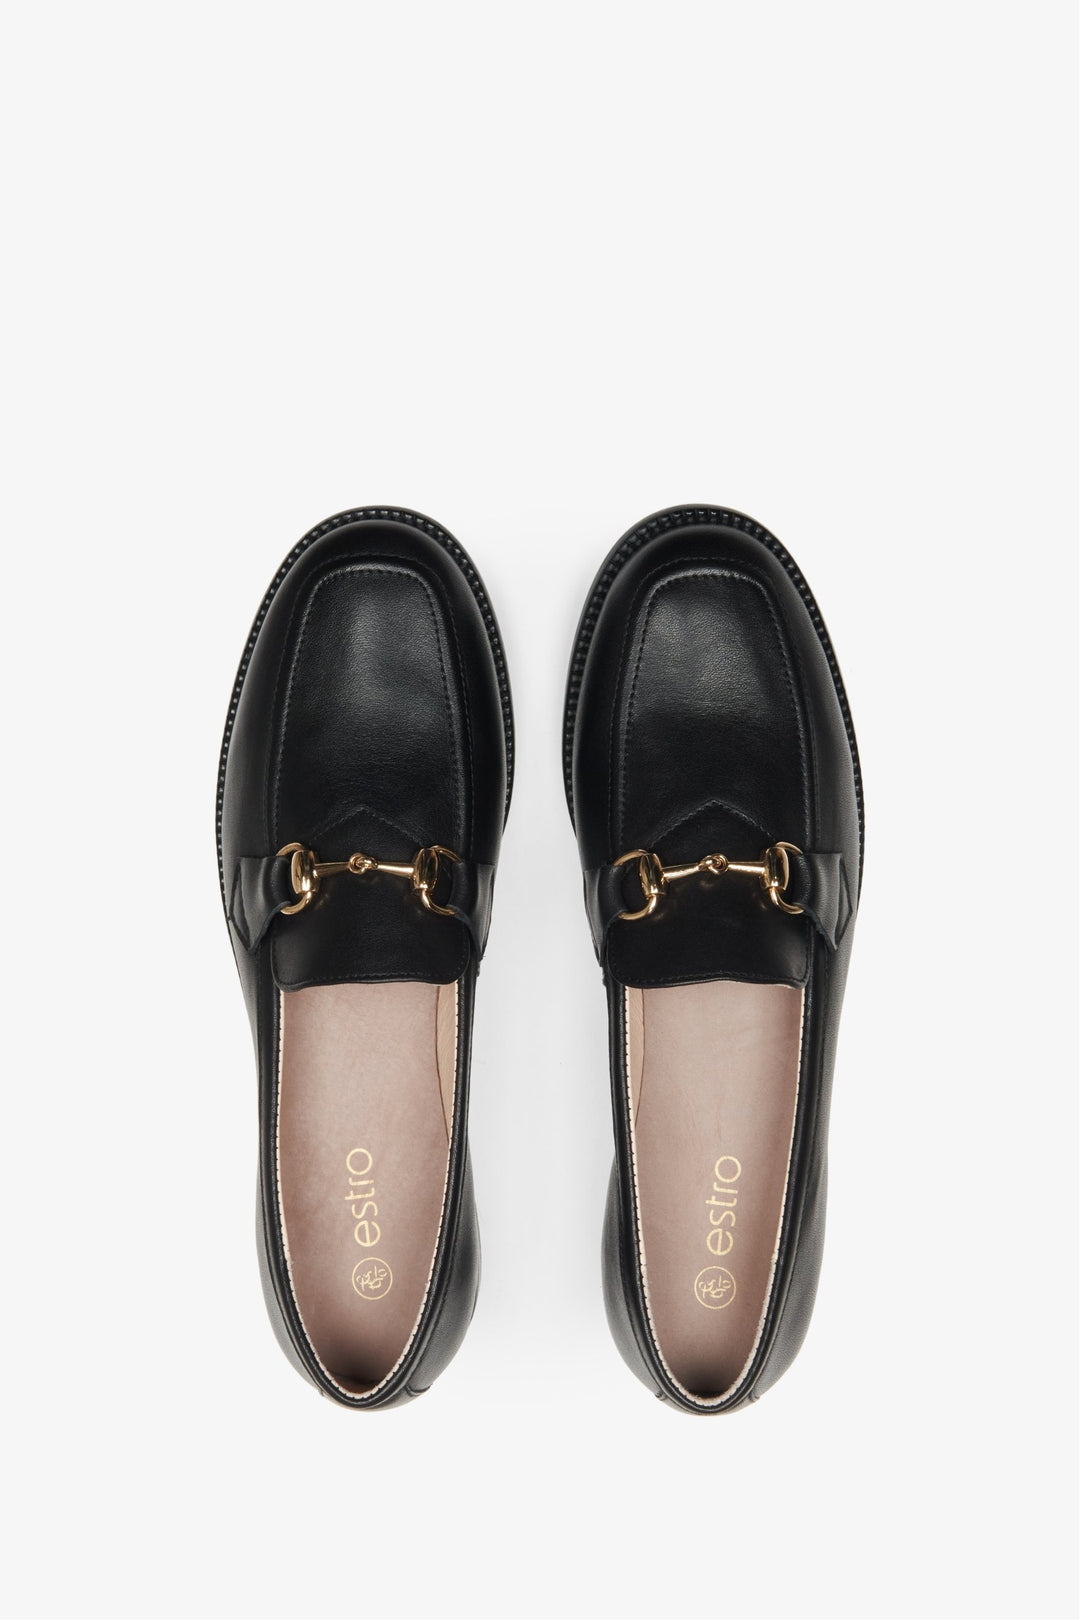 Elegant, black women's loafers made of Italian leather - close-up form above.